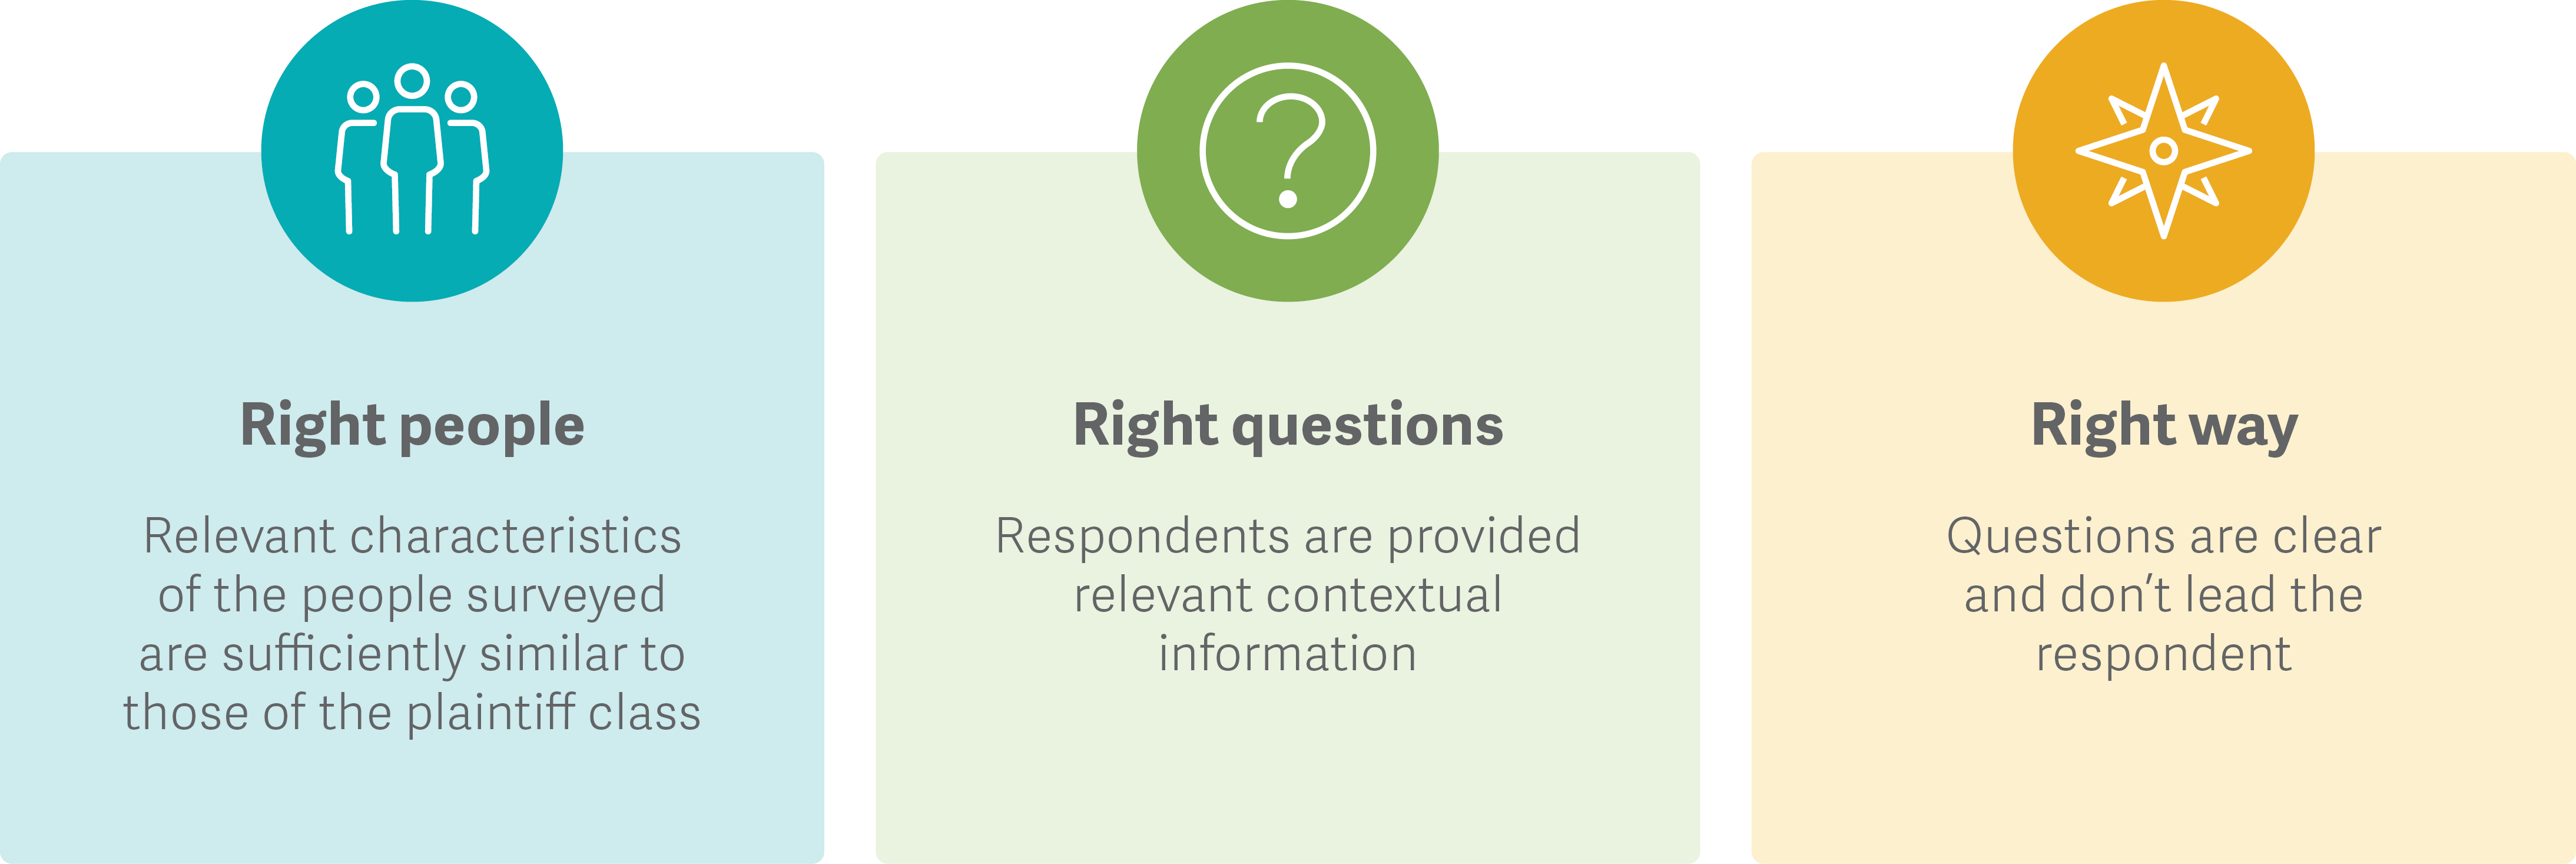 Right people: Relevant characteristics of the people surveyed are sufficiently similar to those of the plaintiff class; Right questions: Respondents are provided relevant contextual information; Right way: Questions are clear and don’t lead the respondent